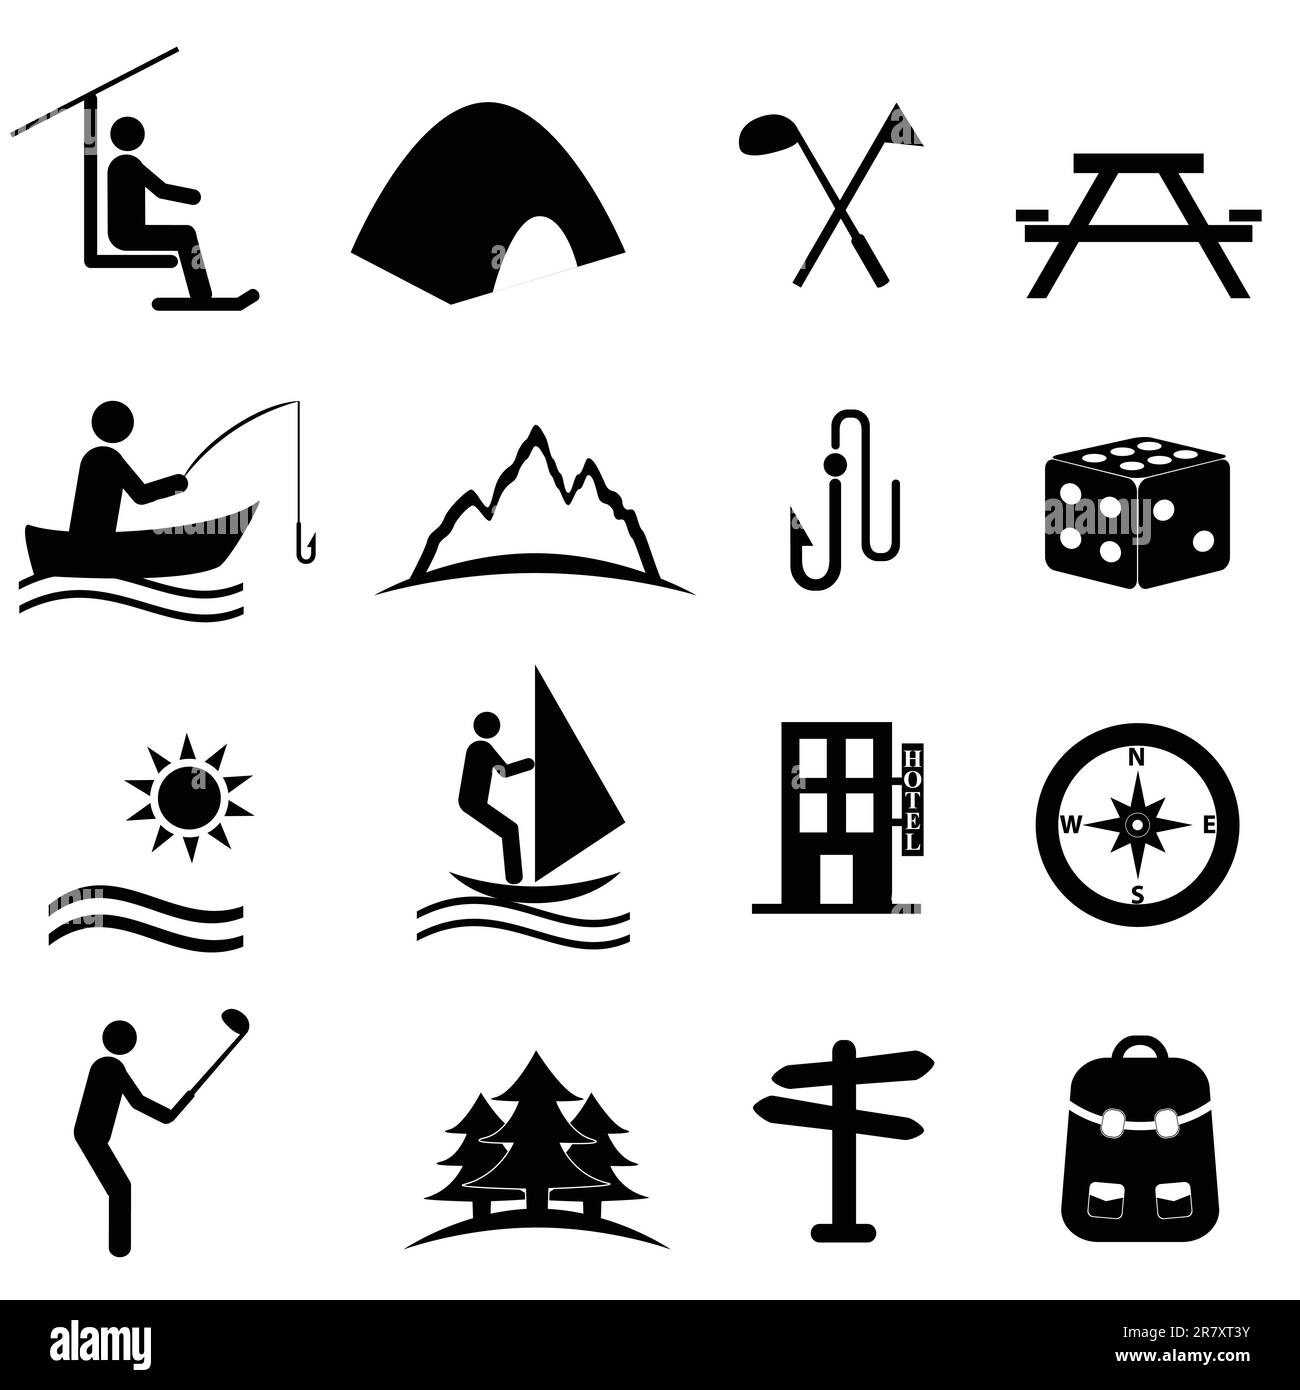 Leisure, sports and recreation icon set Stock Vector